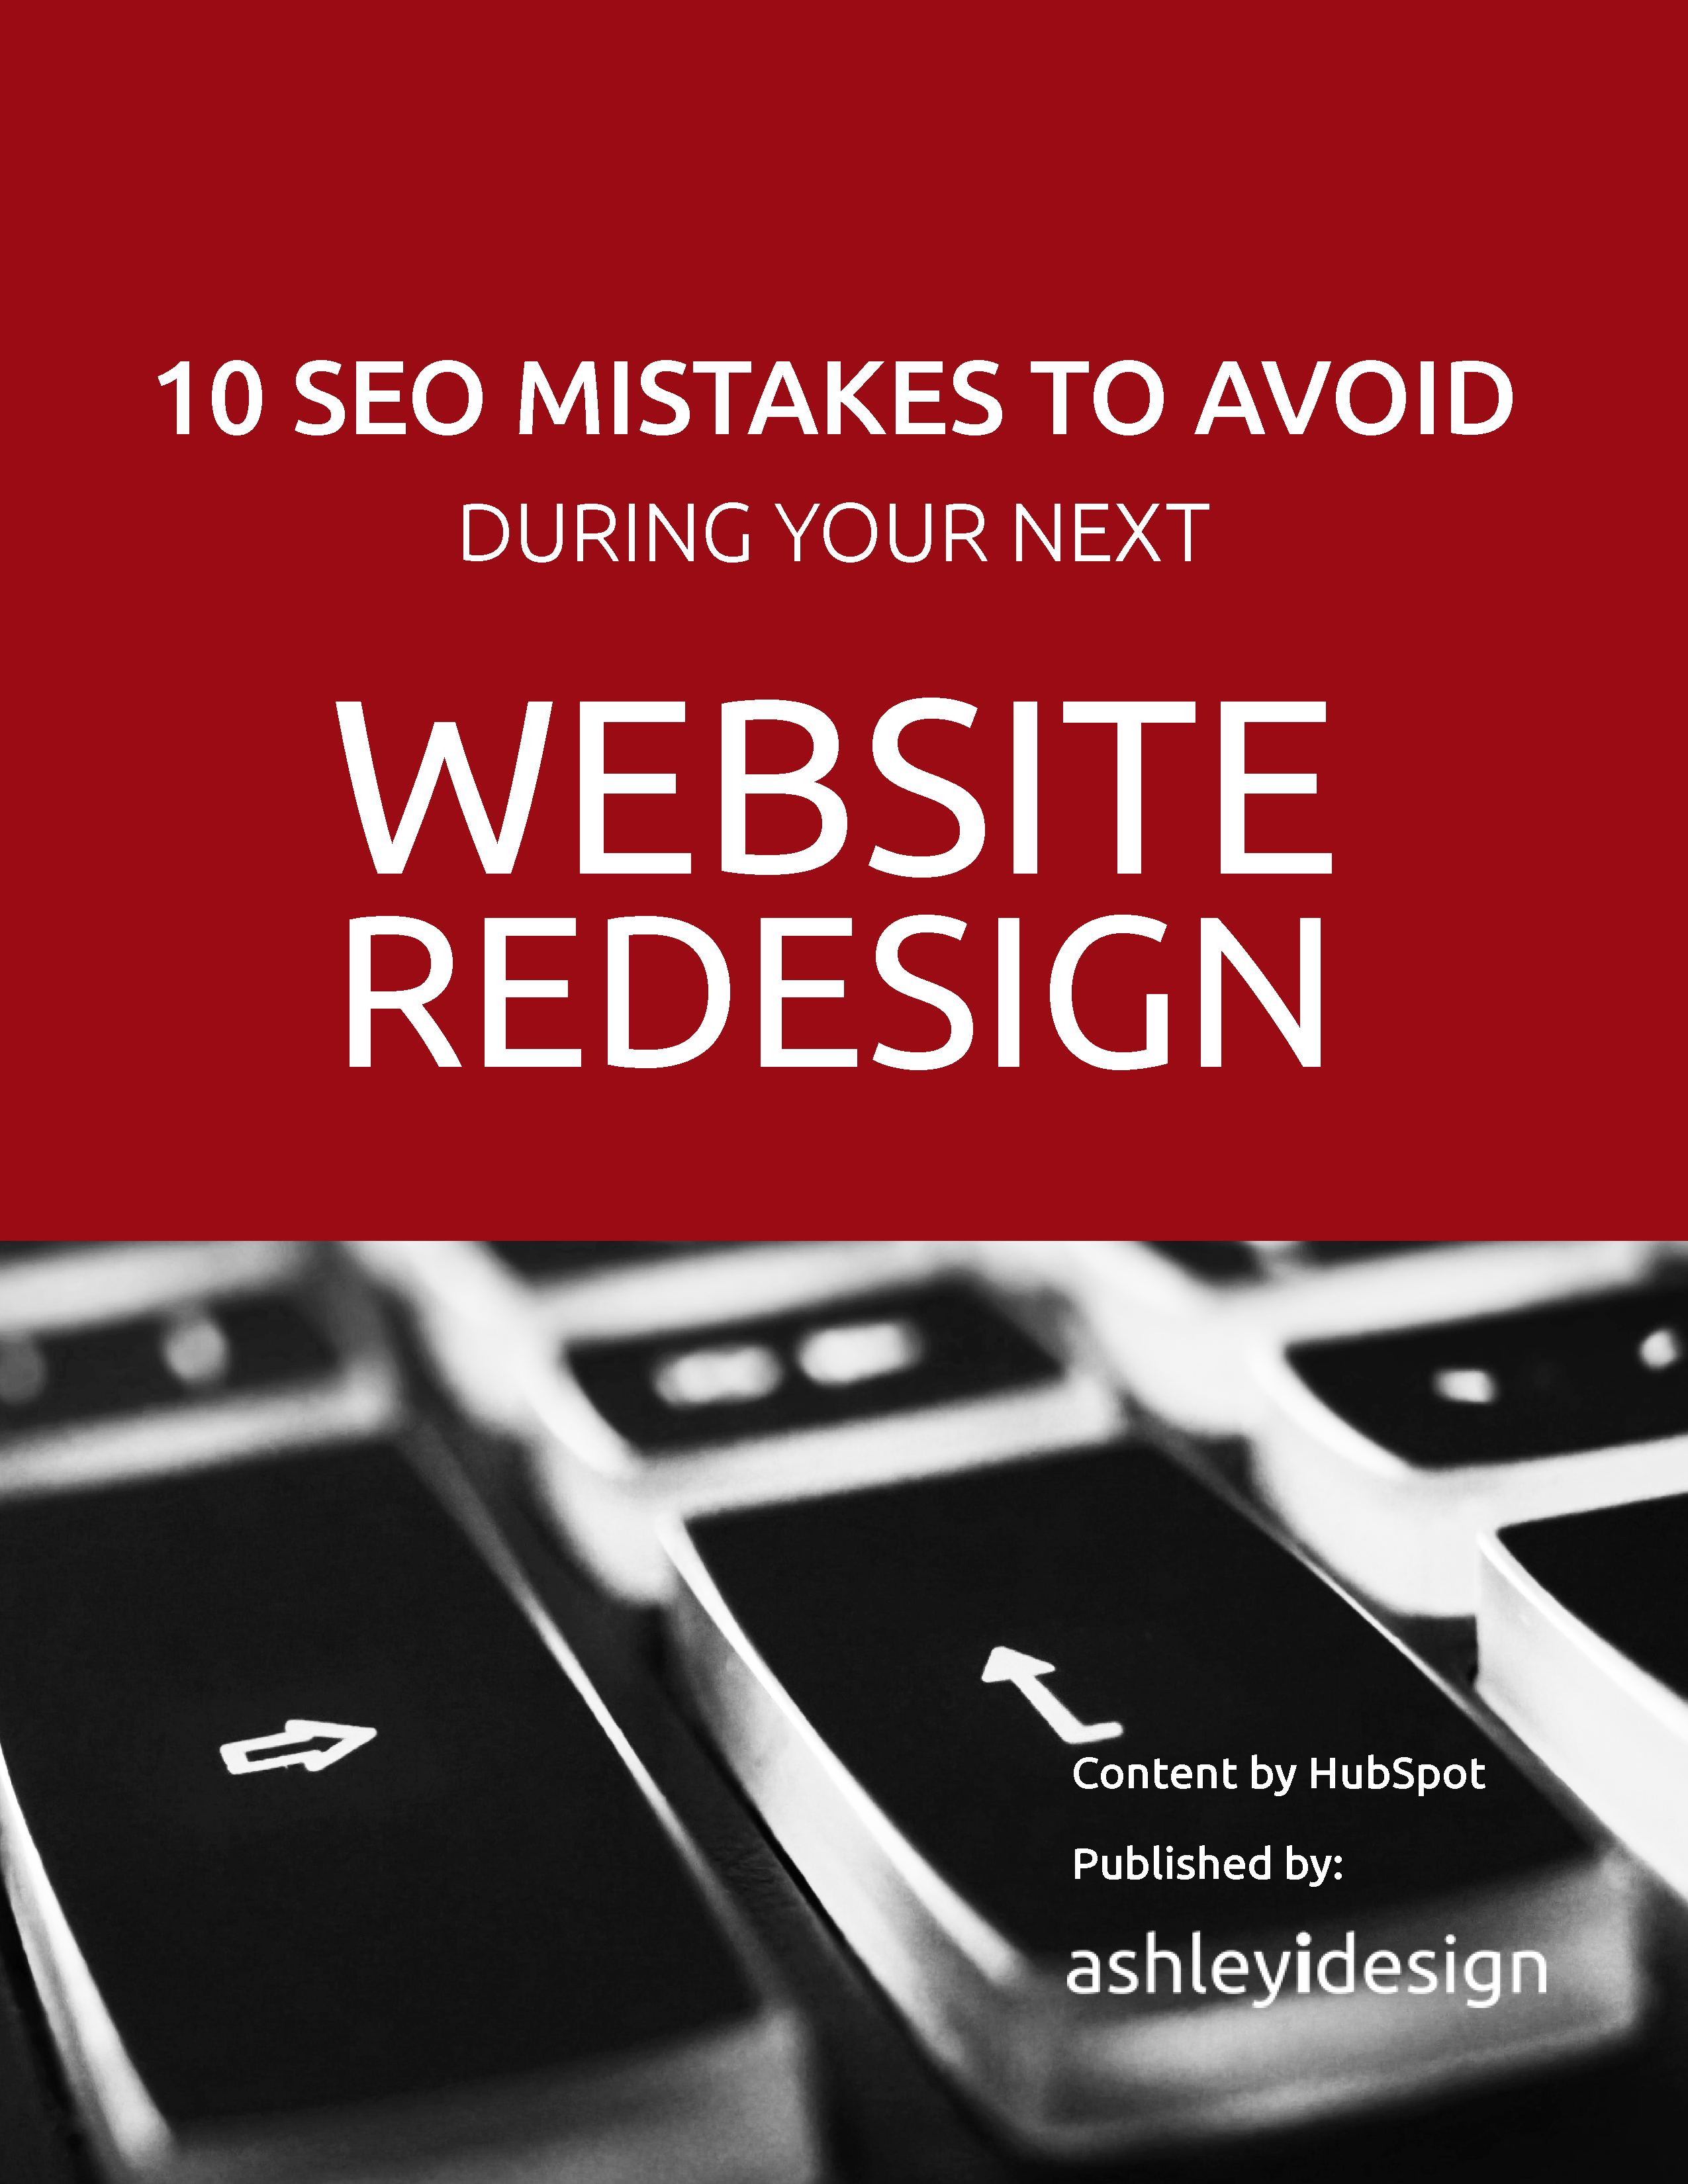 10 SEO Mistakes to Avoid During Your Next Website Redesign